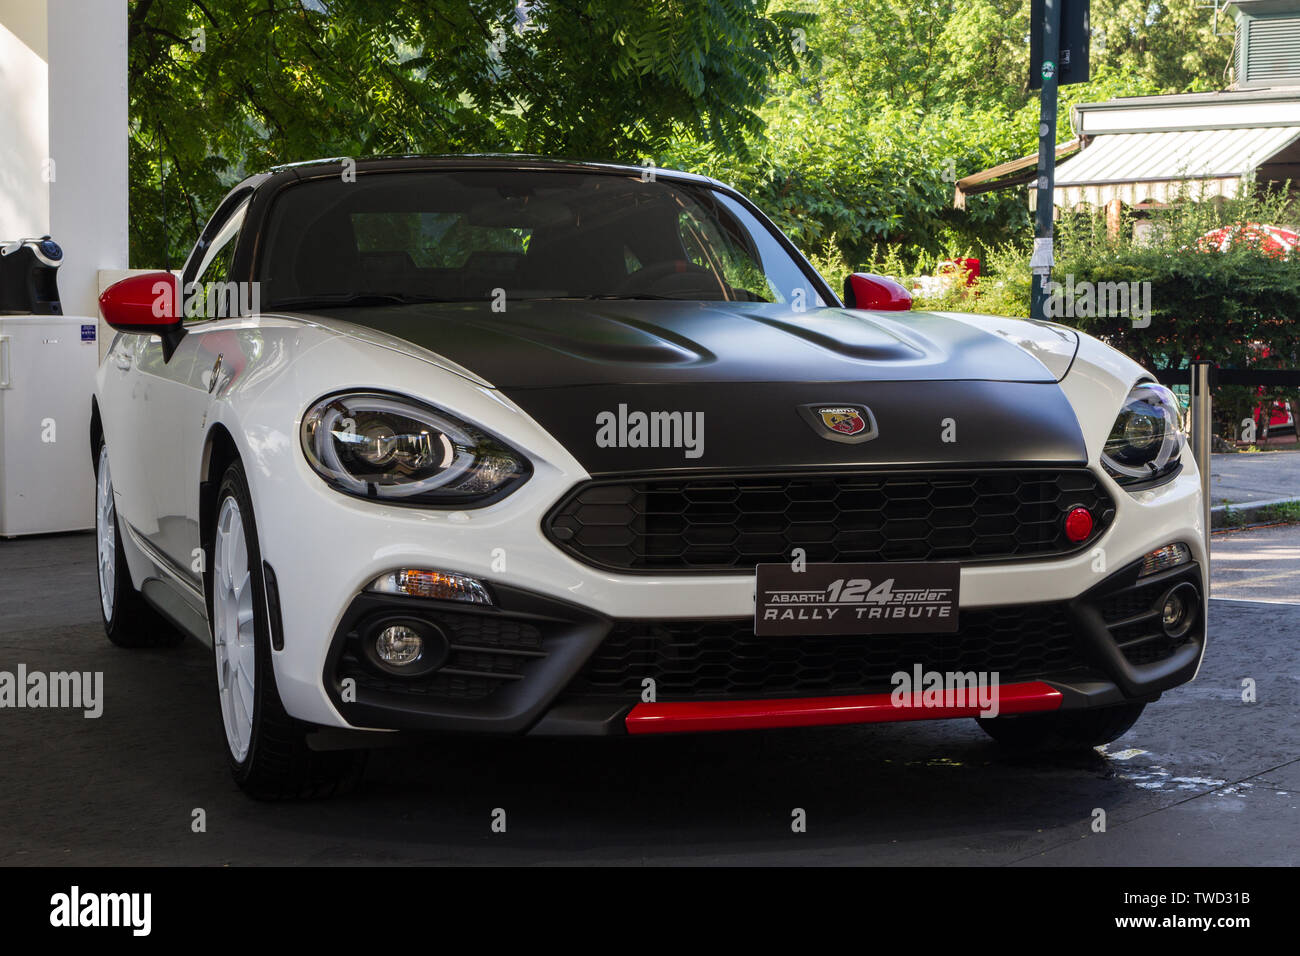 An Abarth 124 spider. 2019 edition of Parco Valentino car show hosts cars by many brands and car designers in Valentino Park in Torino, Italy. Stock Photo